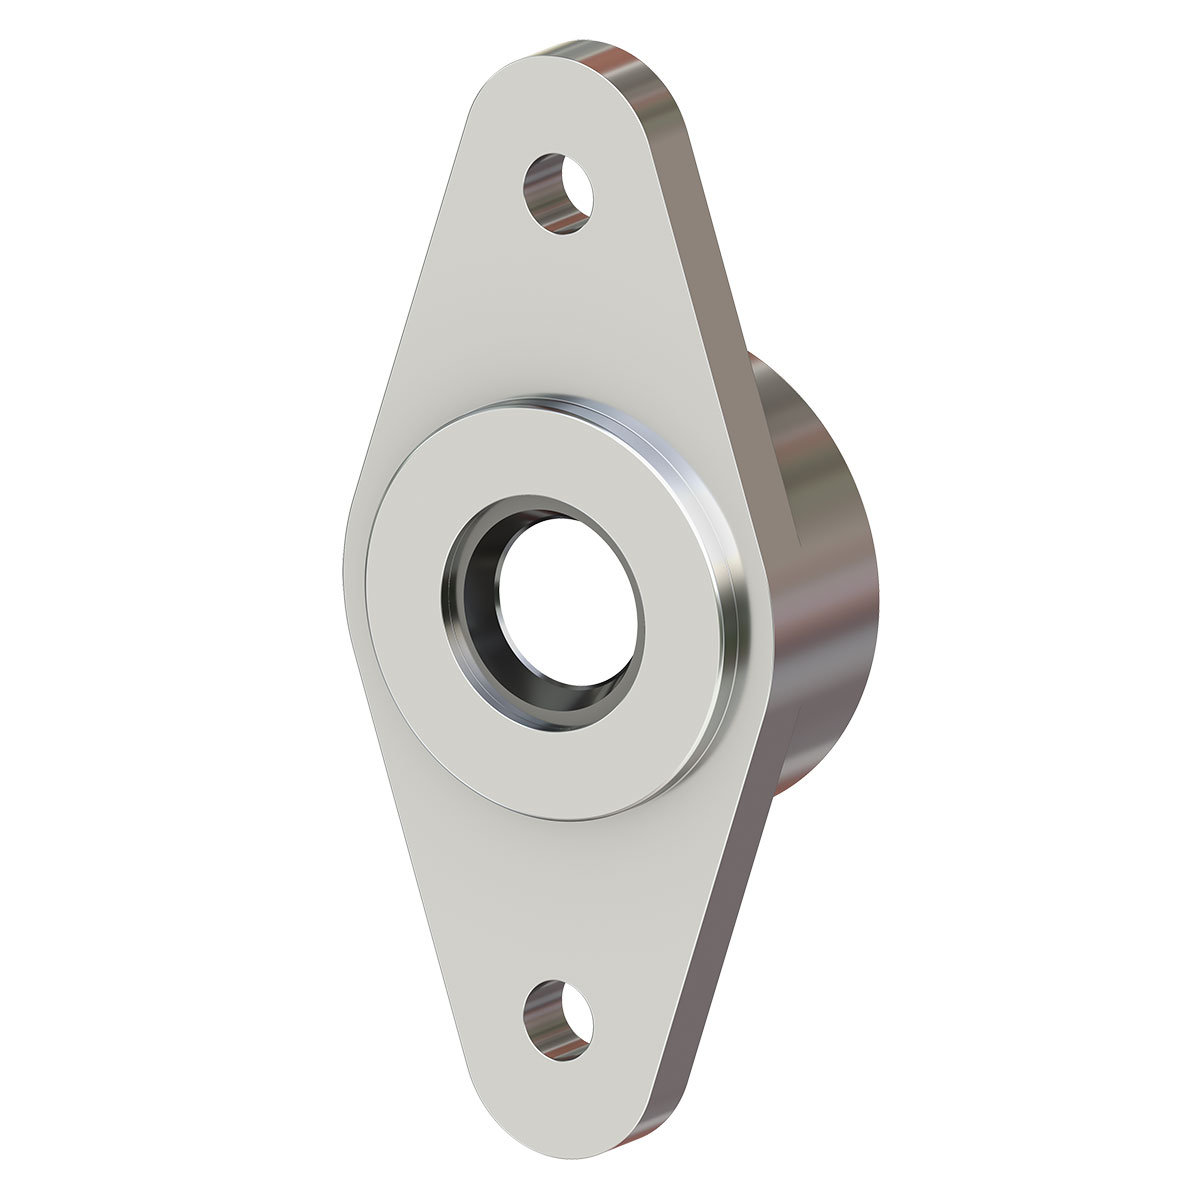 MOUNTING FLANGE WITH HOLES M25